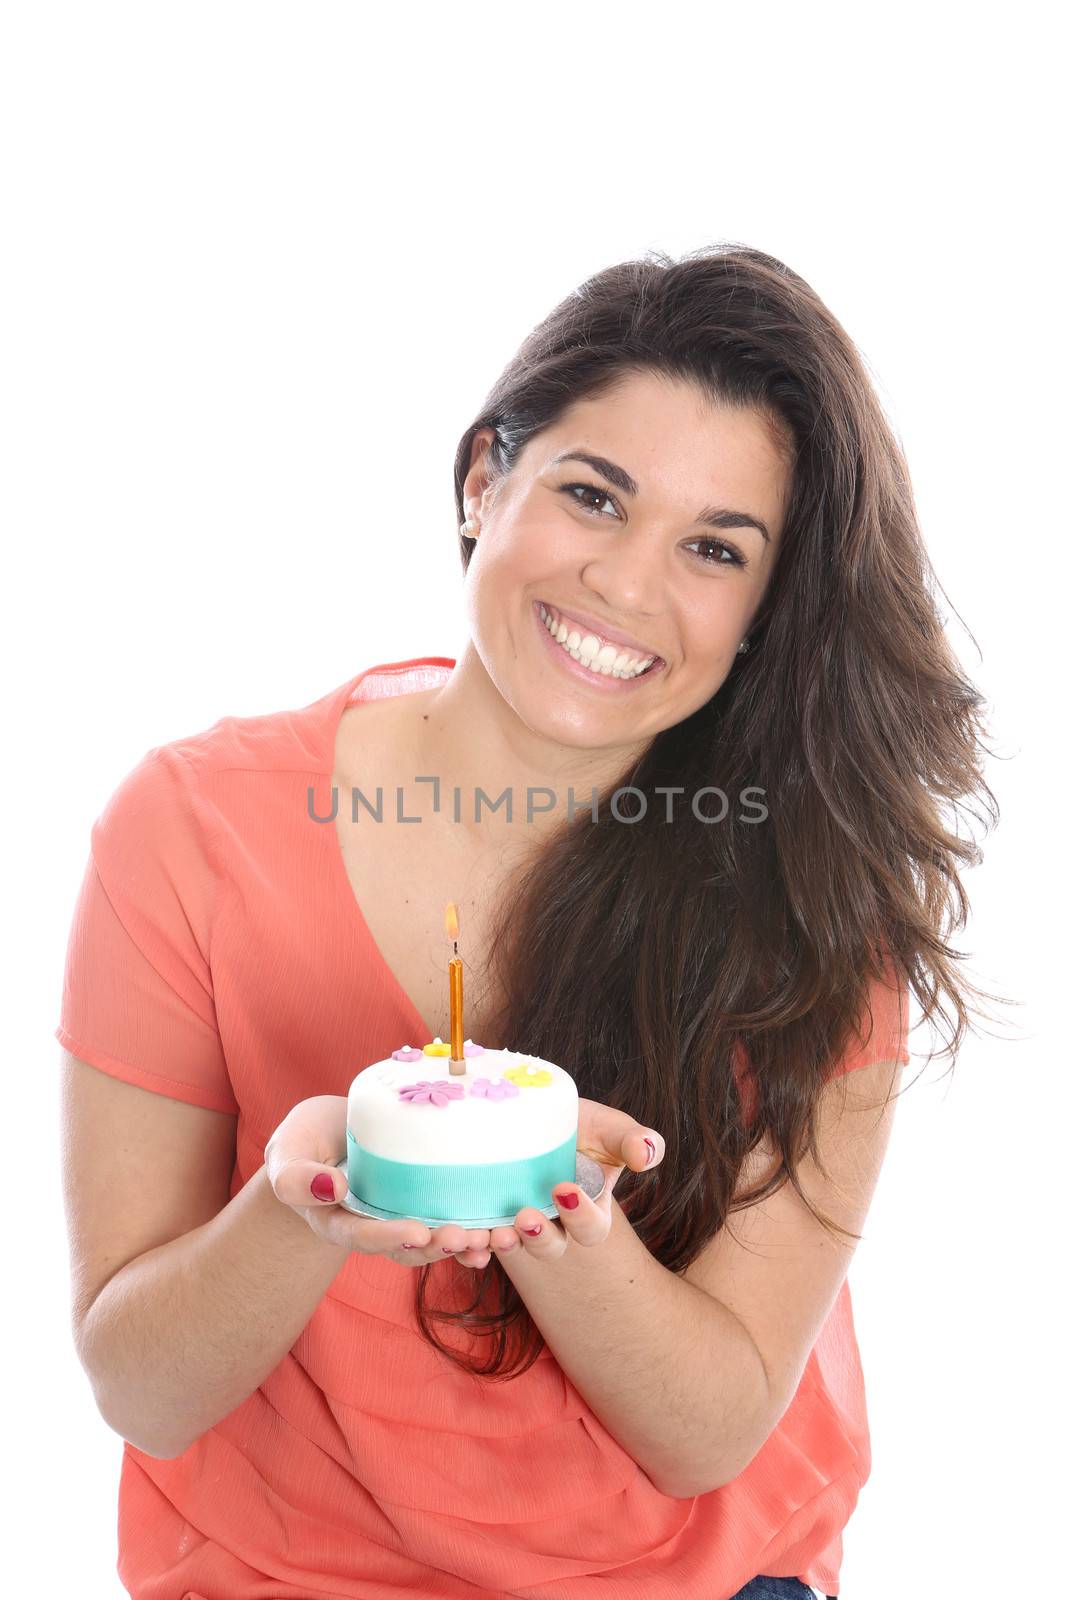 Model Released. Young Woman Holding a Birthday Cake with a Candle